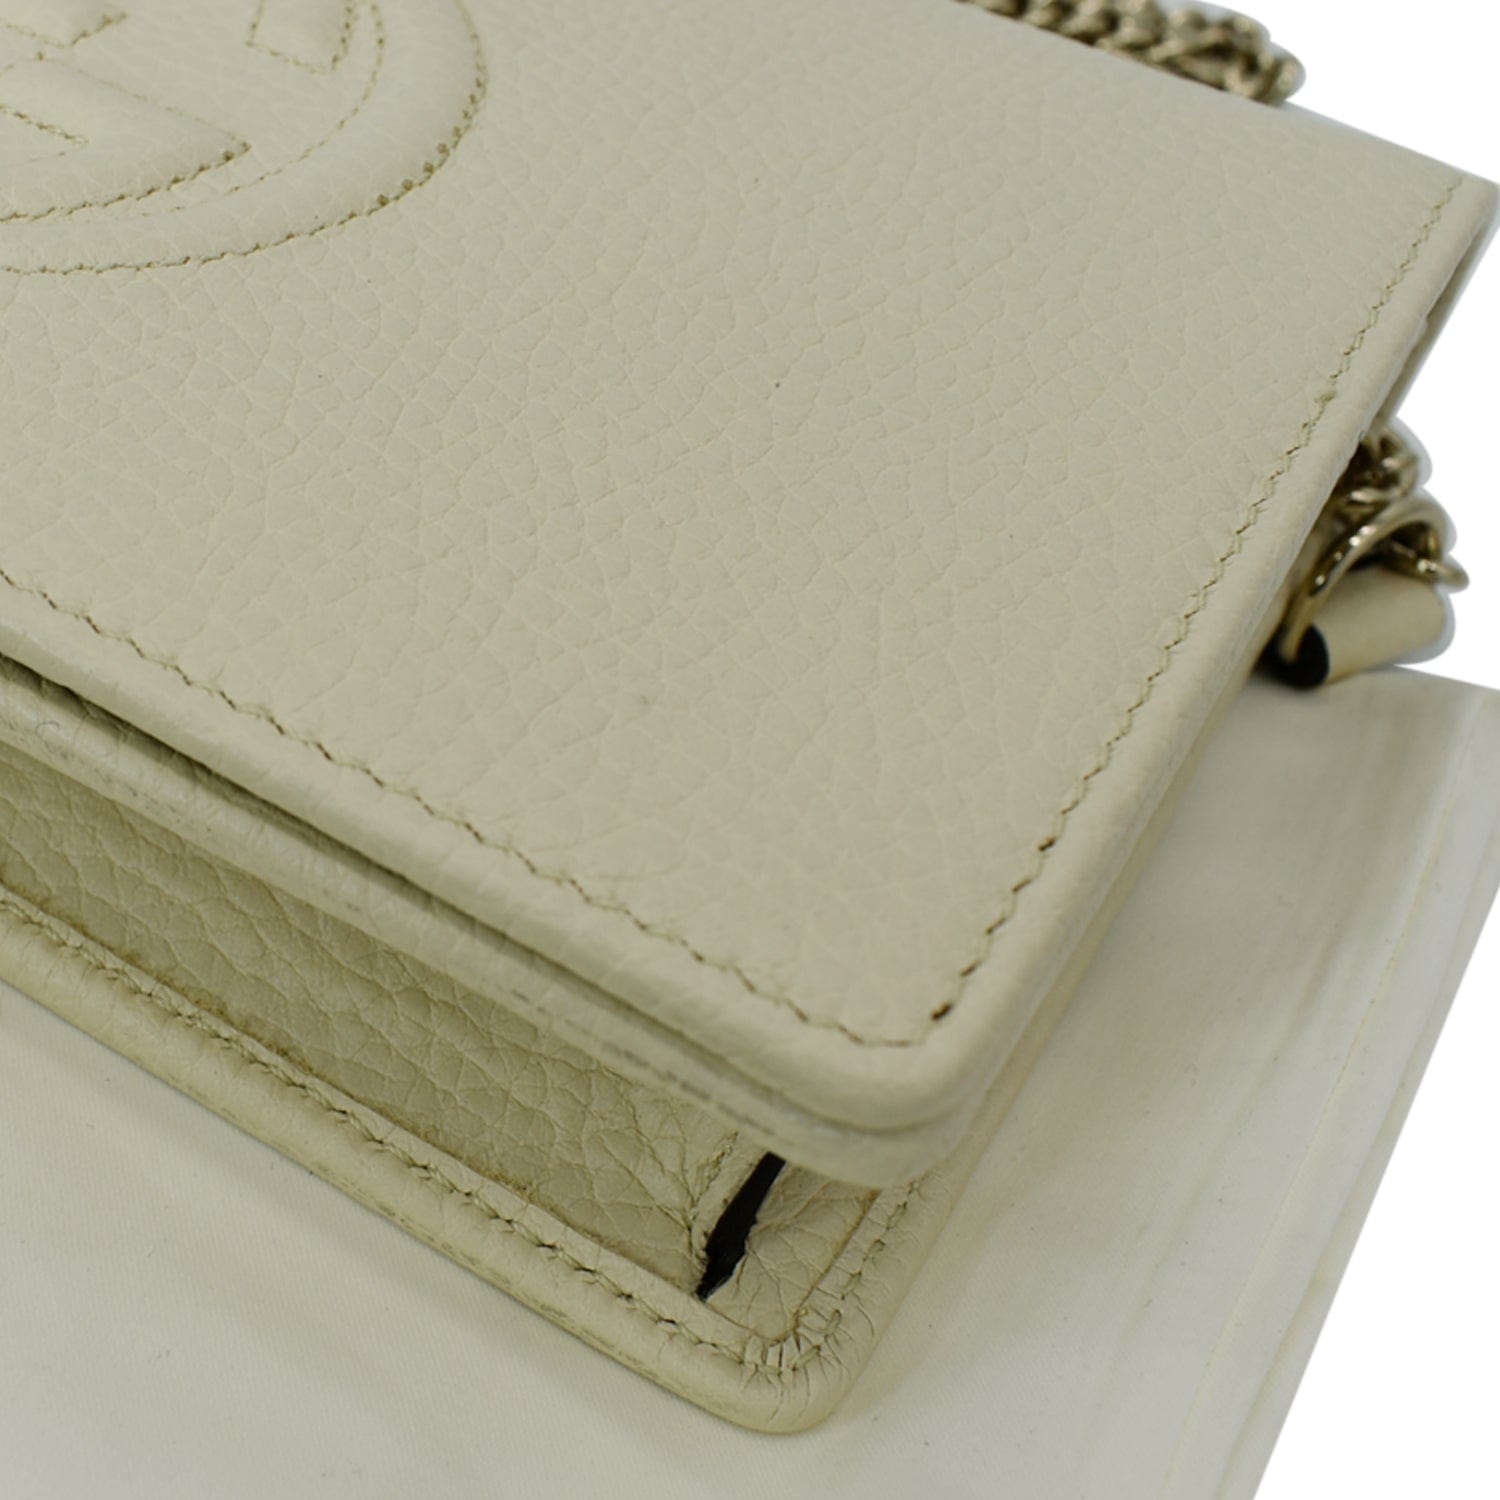 GUCCI Chain Plain Leather Chain Wallet Outlet